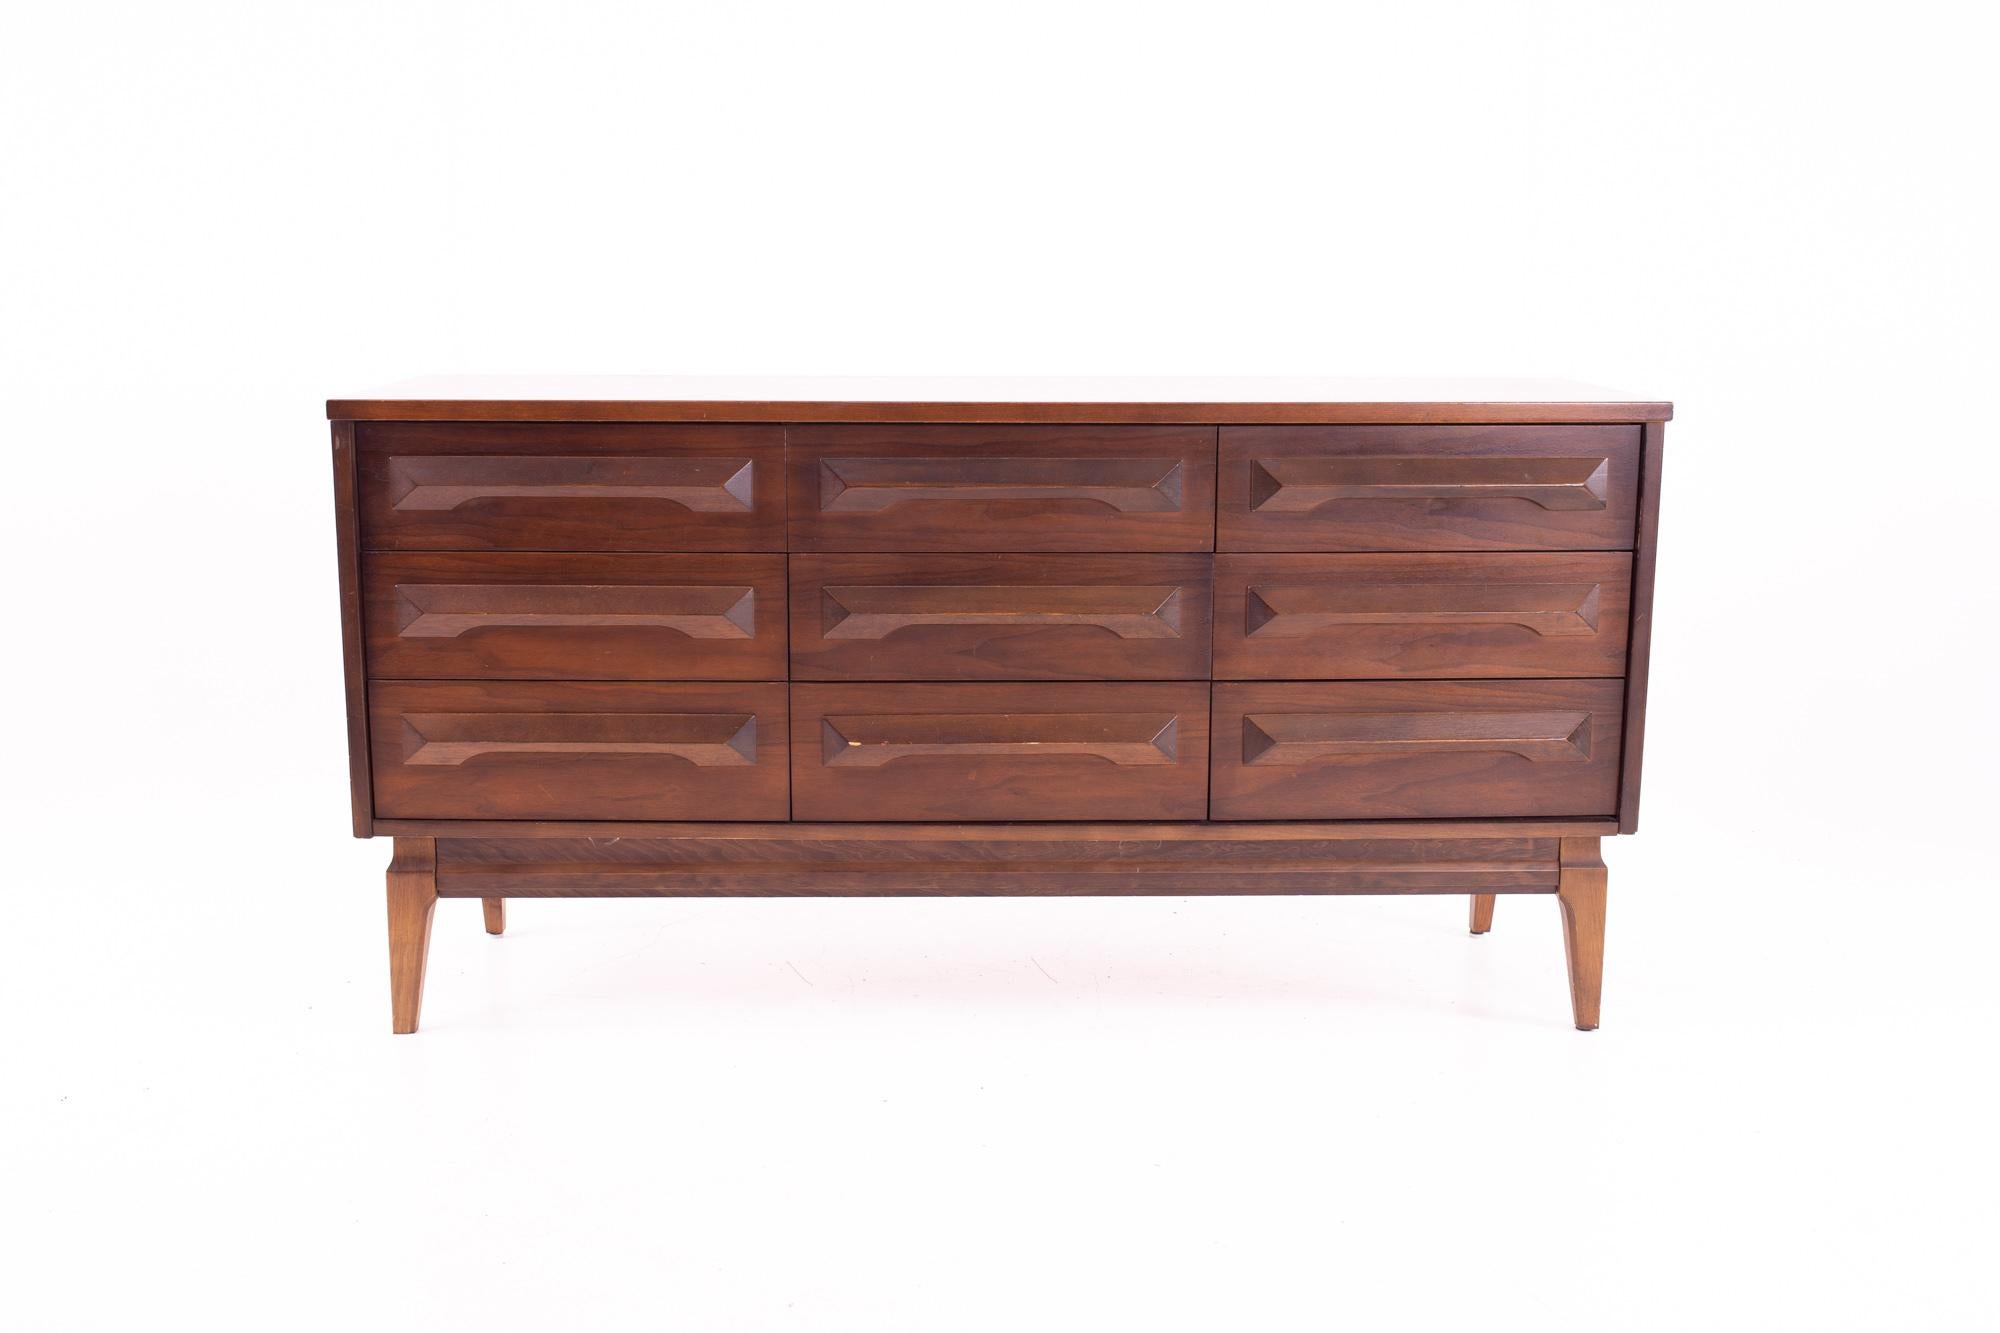 Midcentury walnut 9-drawer lowboy dresser
Dresser measures: 60.25 wide x 17.5 deep x 30.25 high

All pieces of furniture can be had in what we call restored vintage condition. That means the piece is restored upon purchase so it’s free of